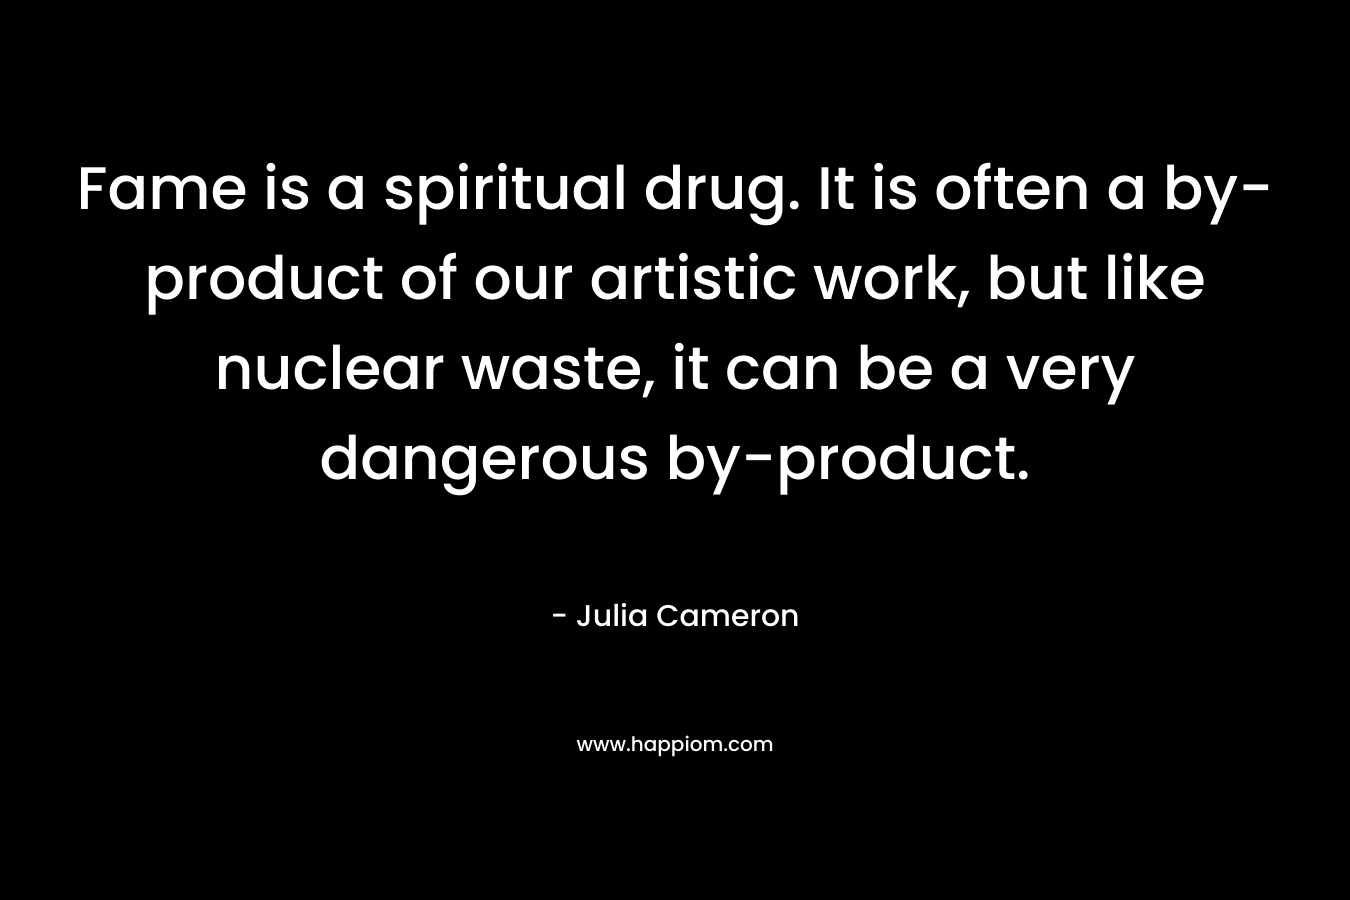 Fame is a spiritual drug. It is often a by-product of our artistic work, but like nuclear waste, it can be a very dangerous by-product. – Julia Cameron